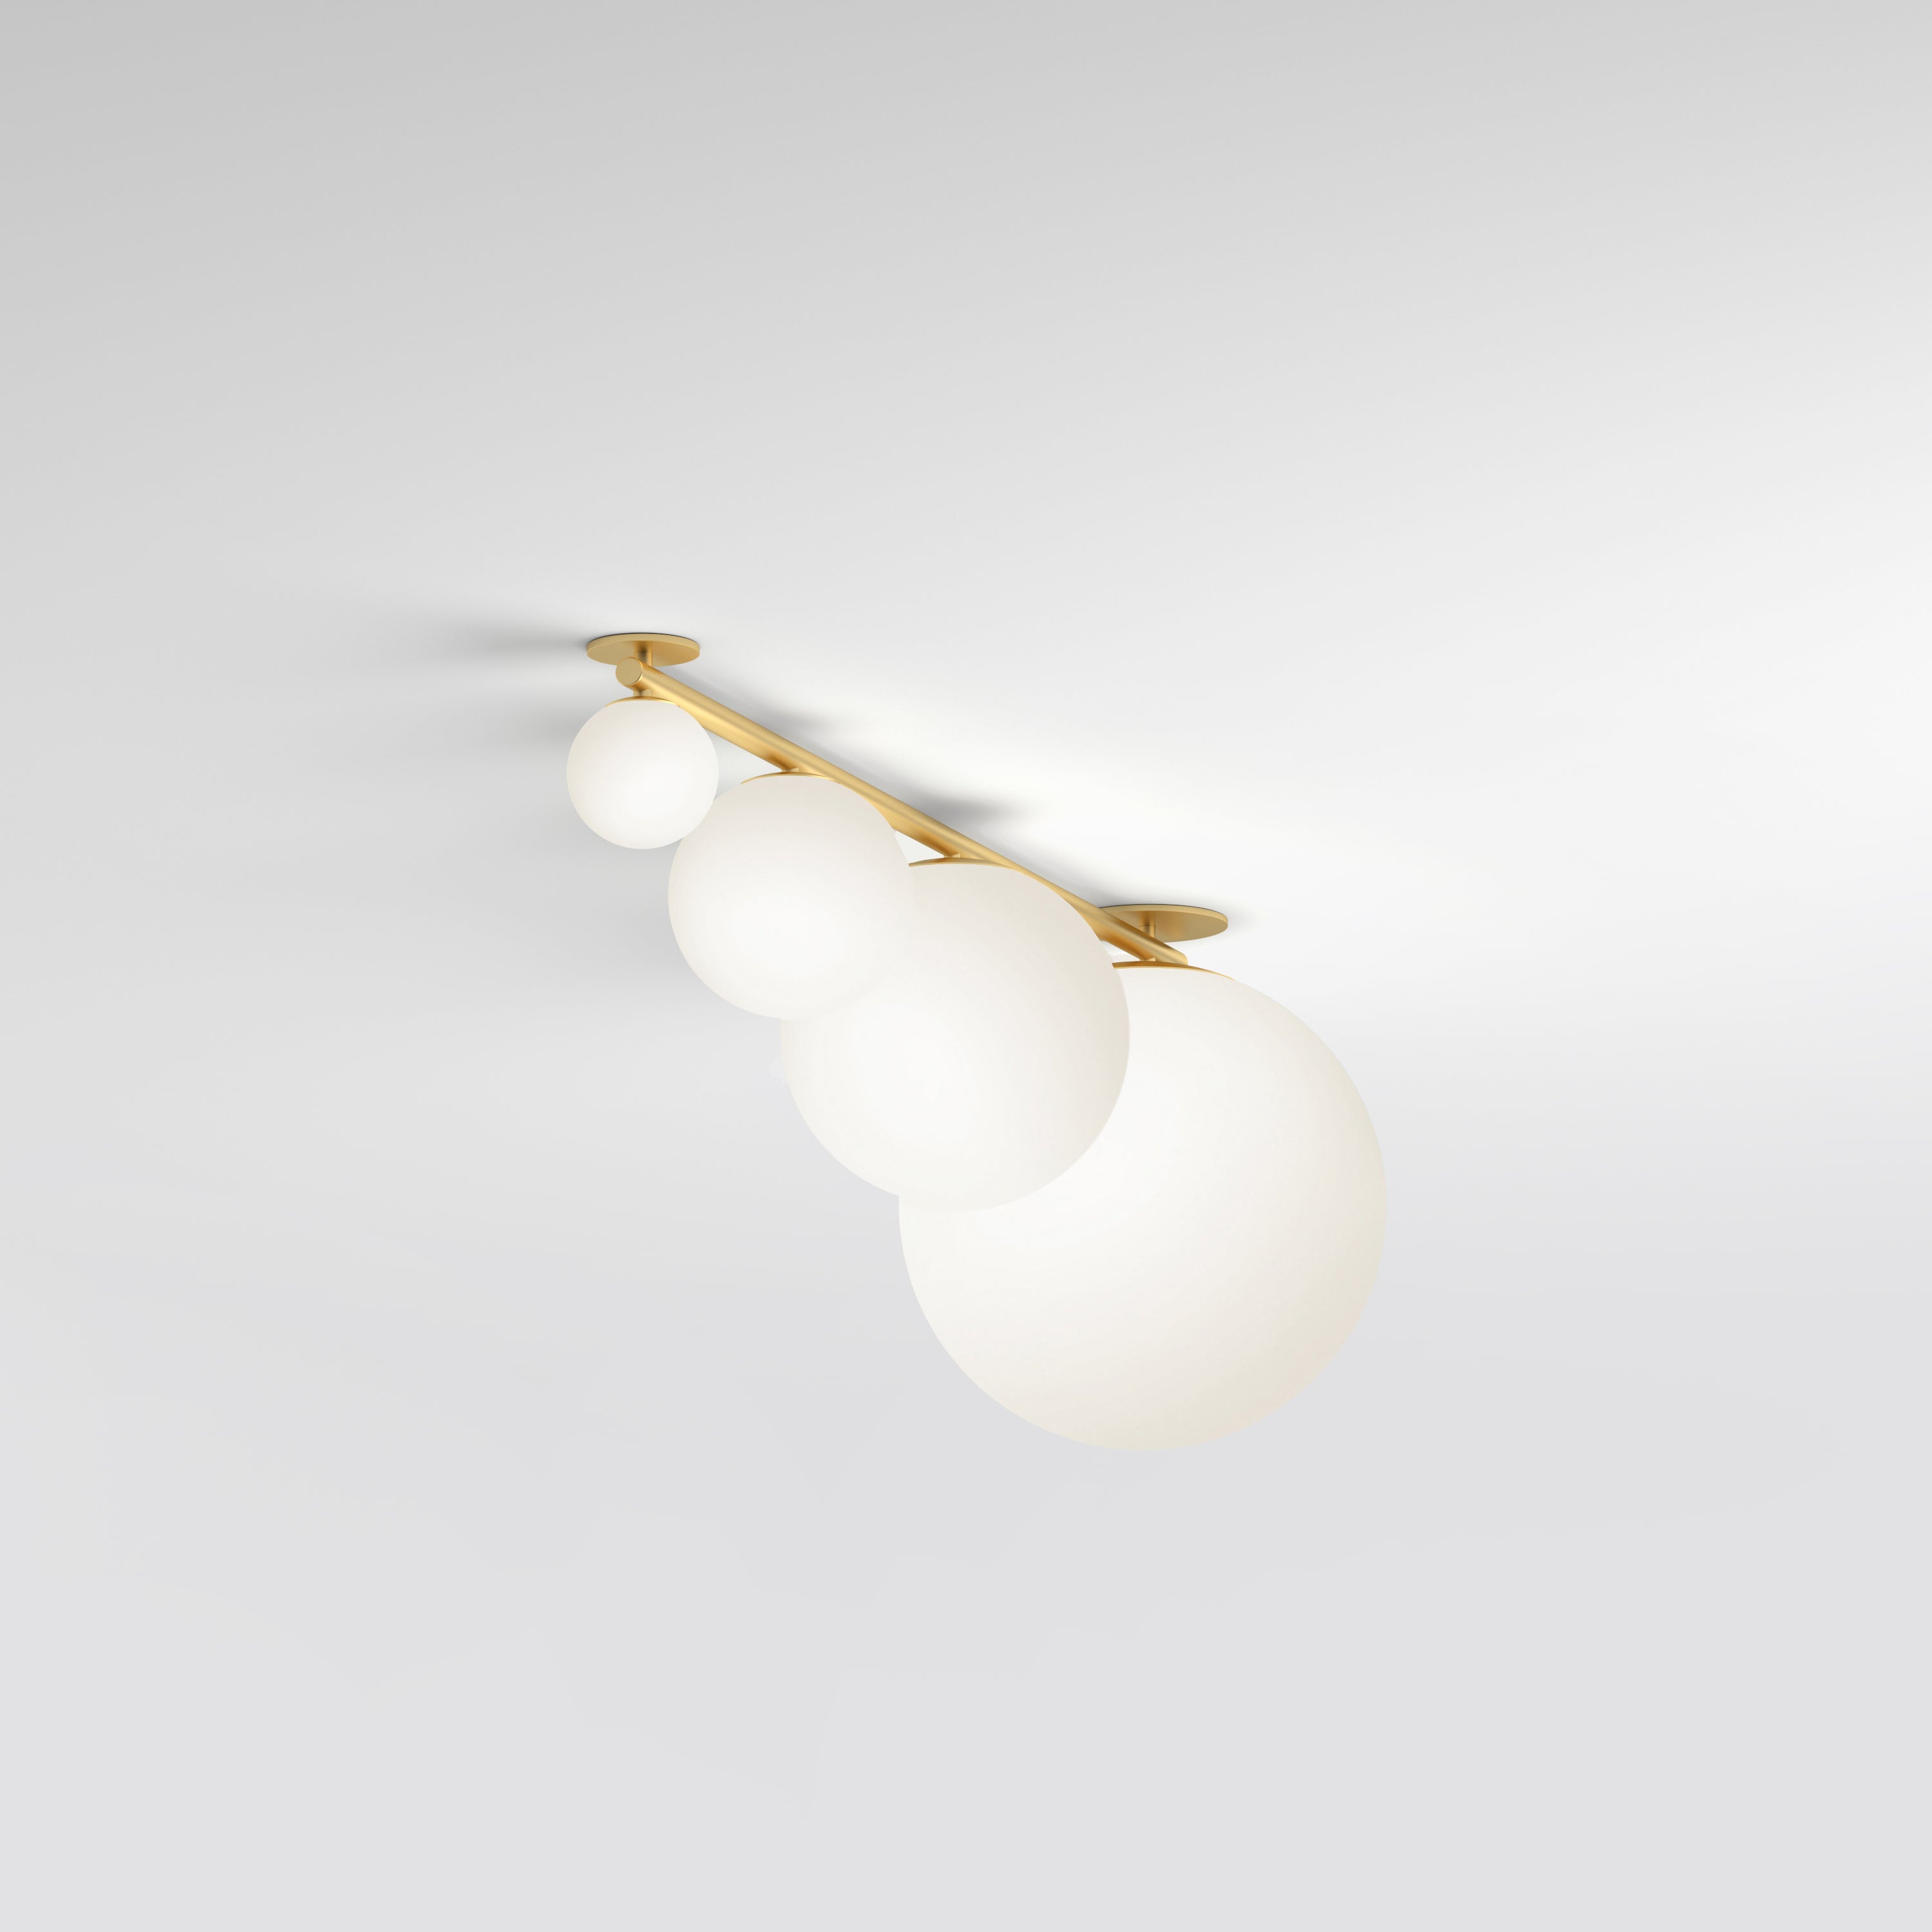 Perspective 432 Ceiling Light 4 Globes · €1150 · ATELIER ARETI | CURATED BY EYEDS